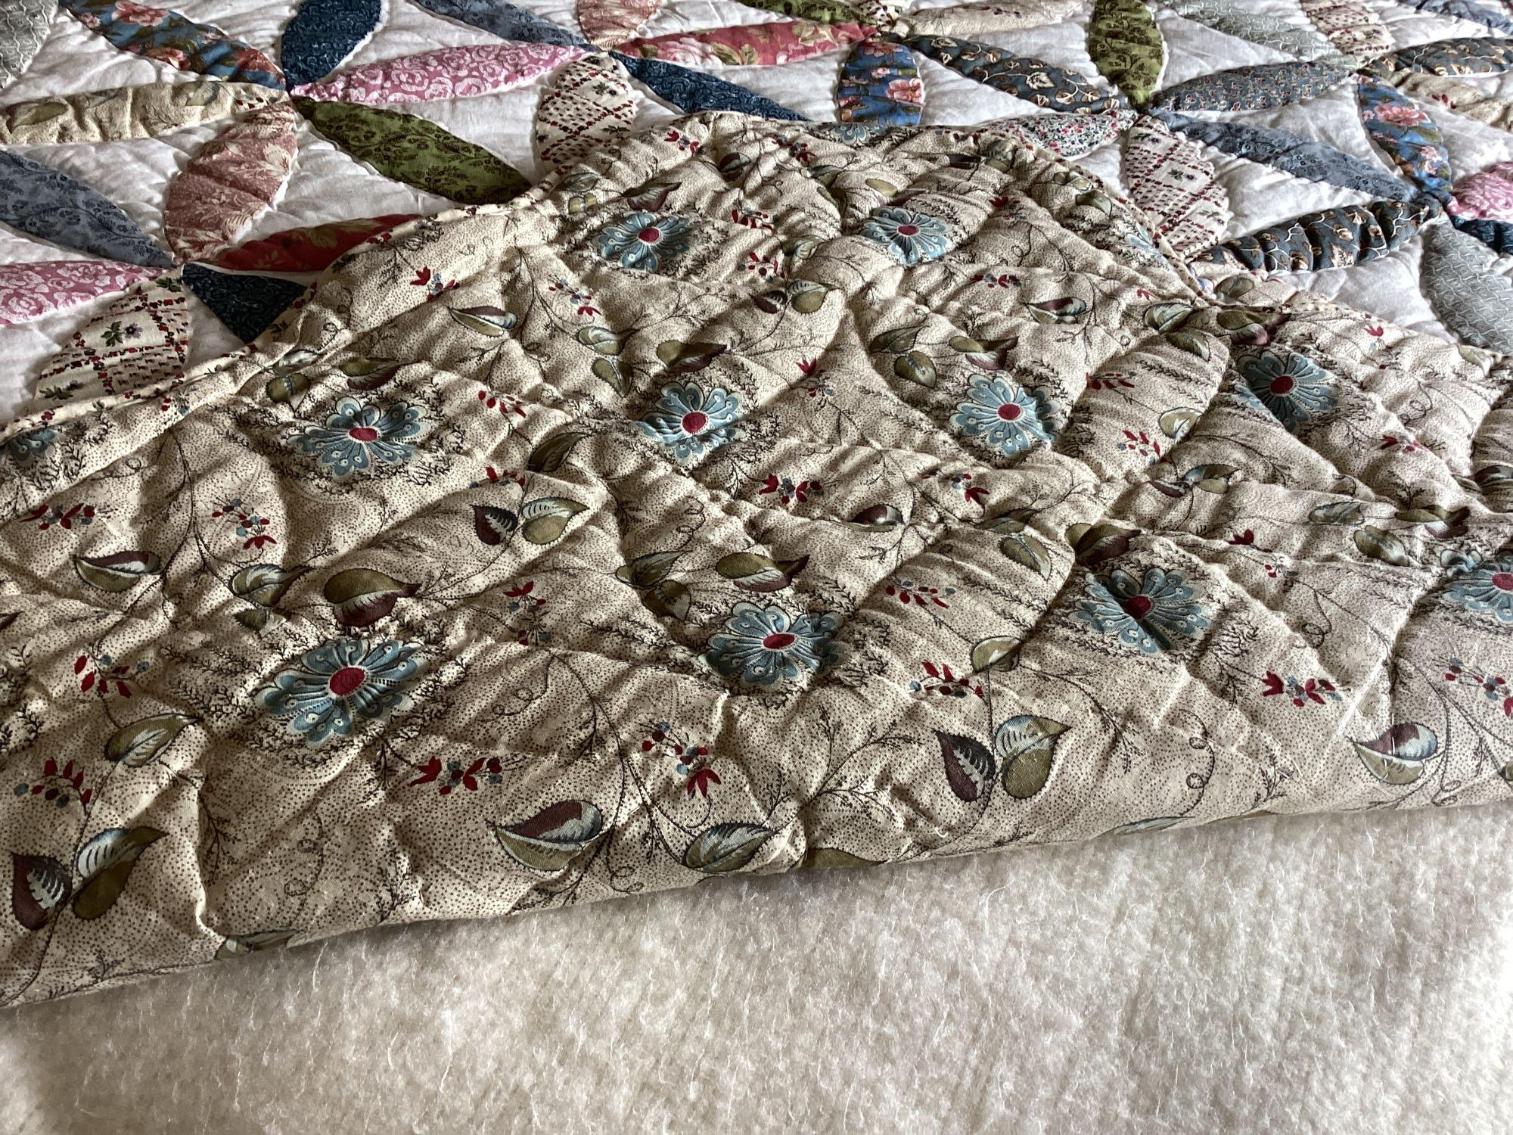 Image for Queen Quilt